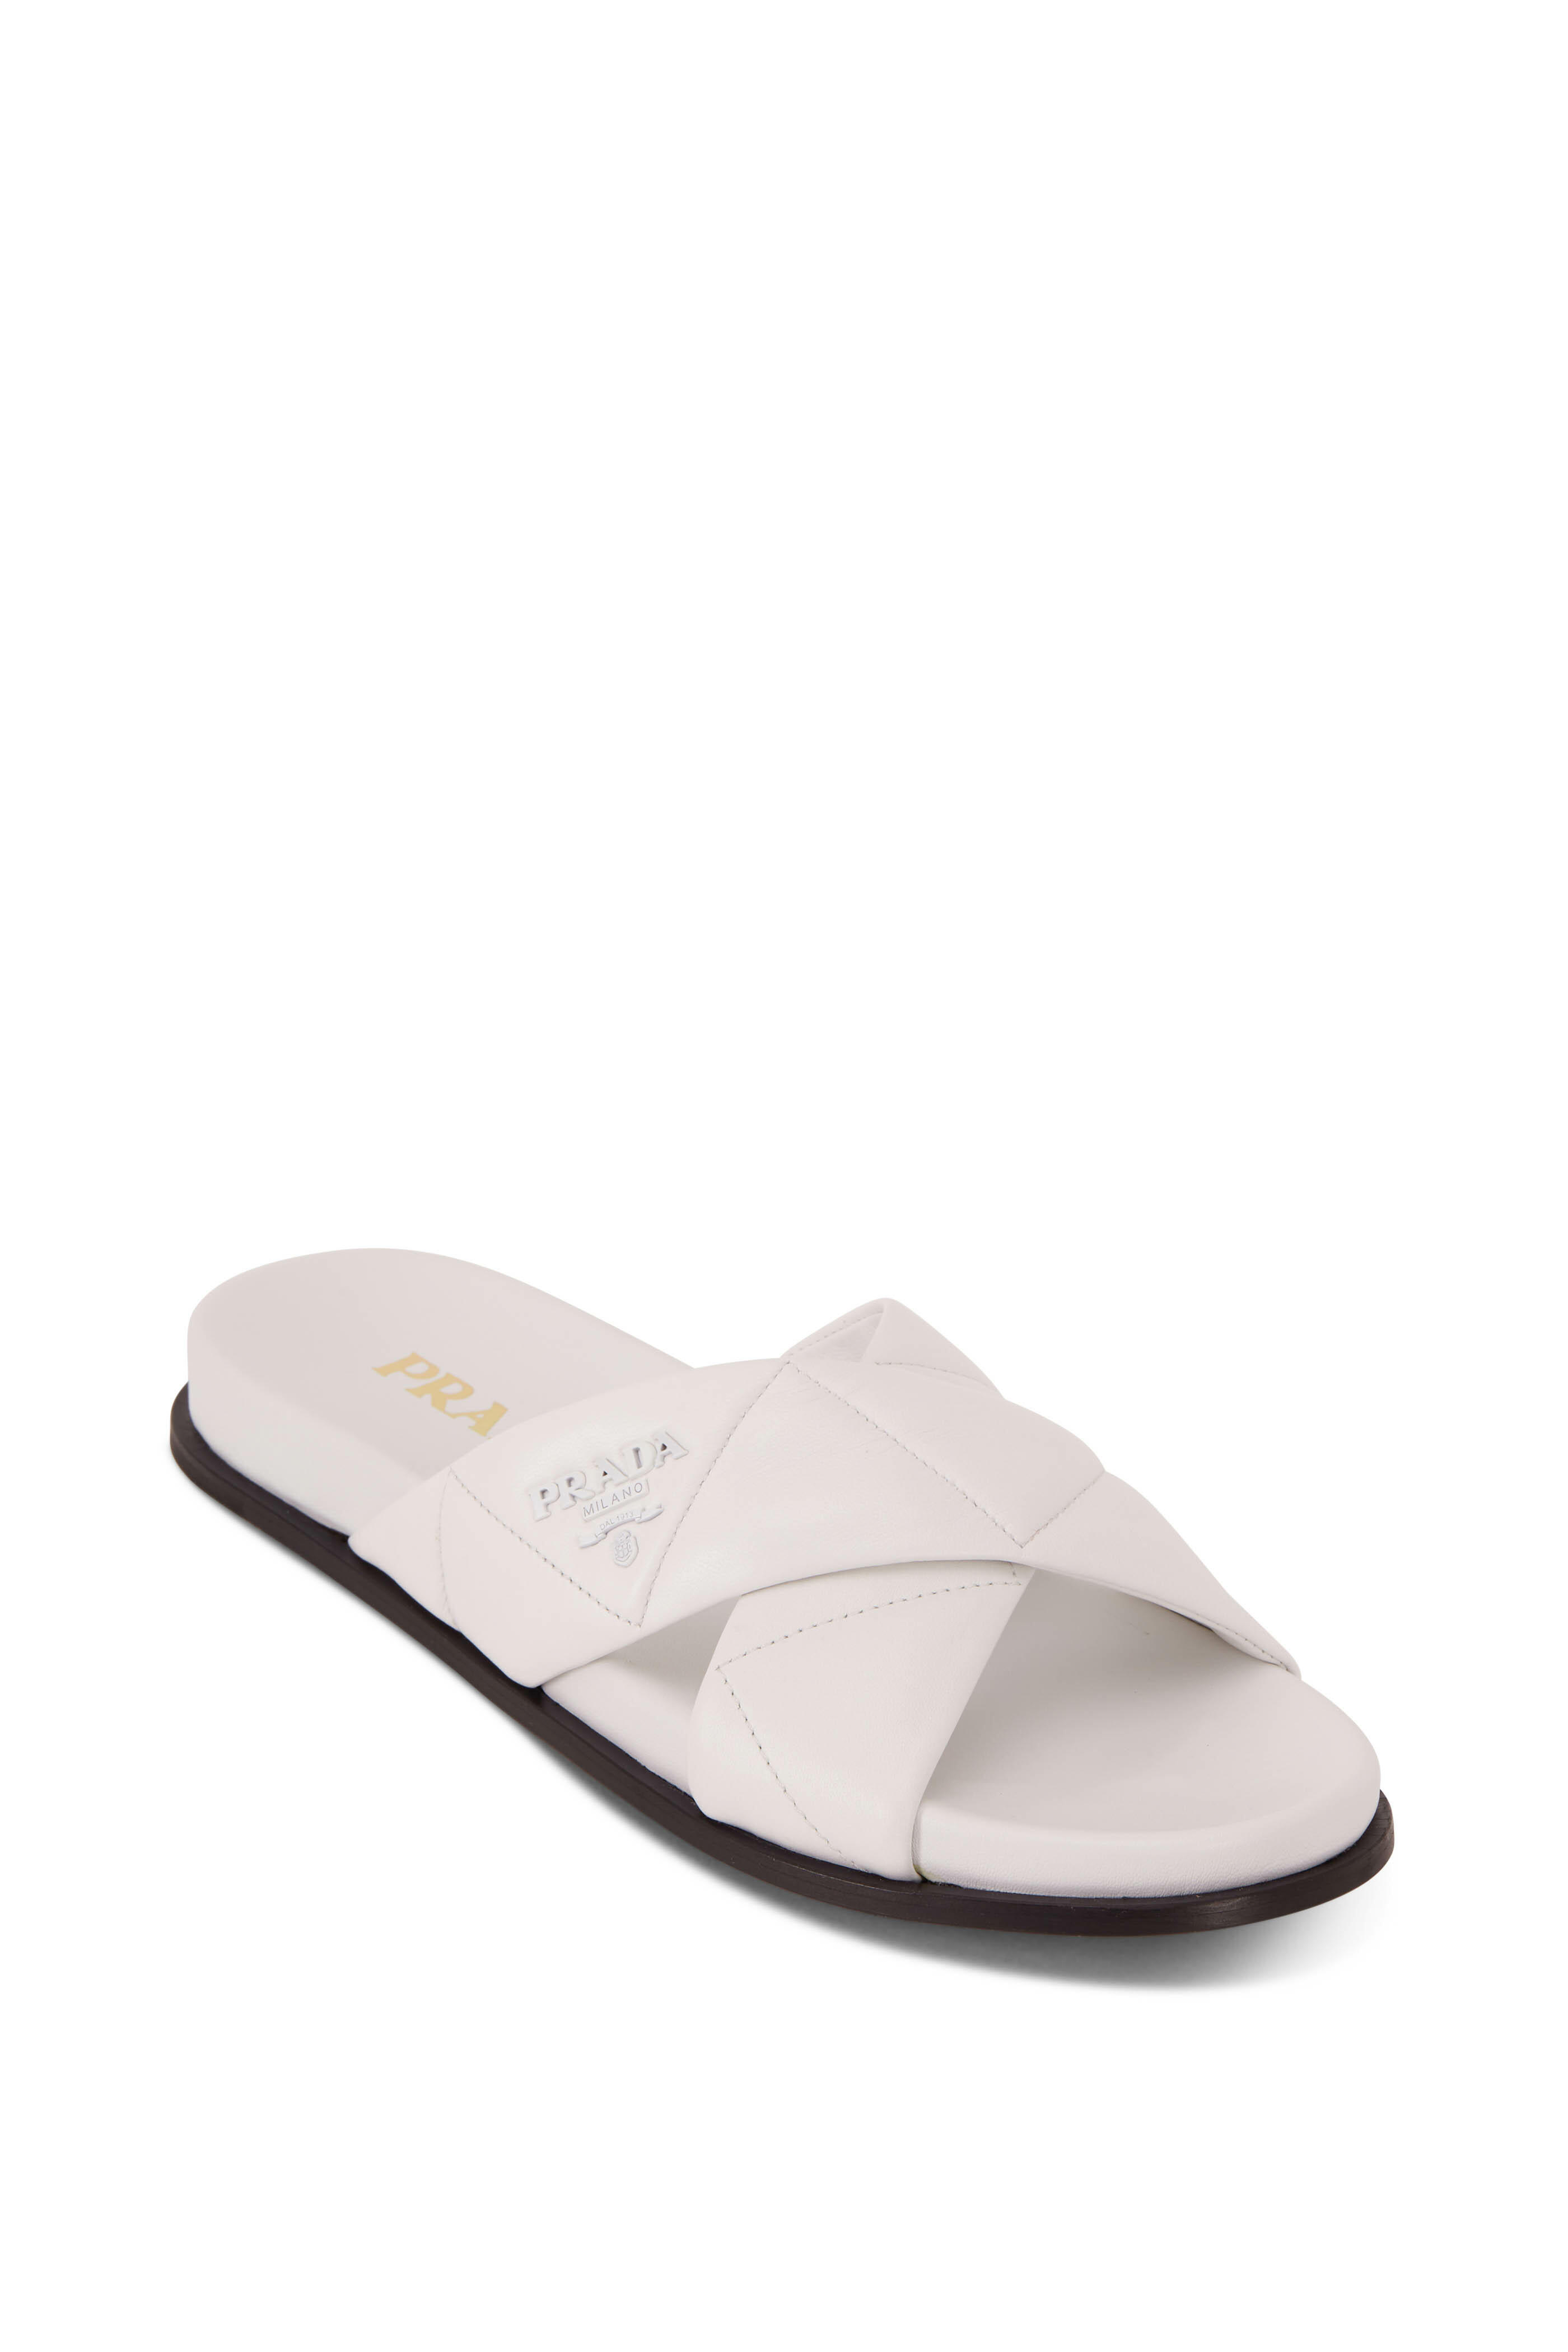 Prada - White Quilted Nappa Leather Criss Cross Slide